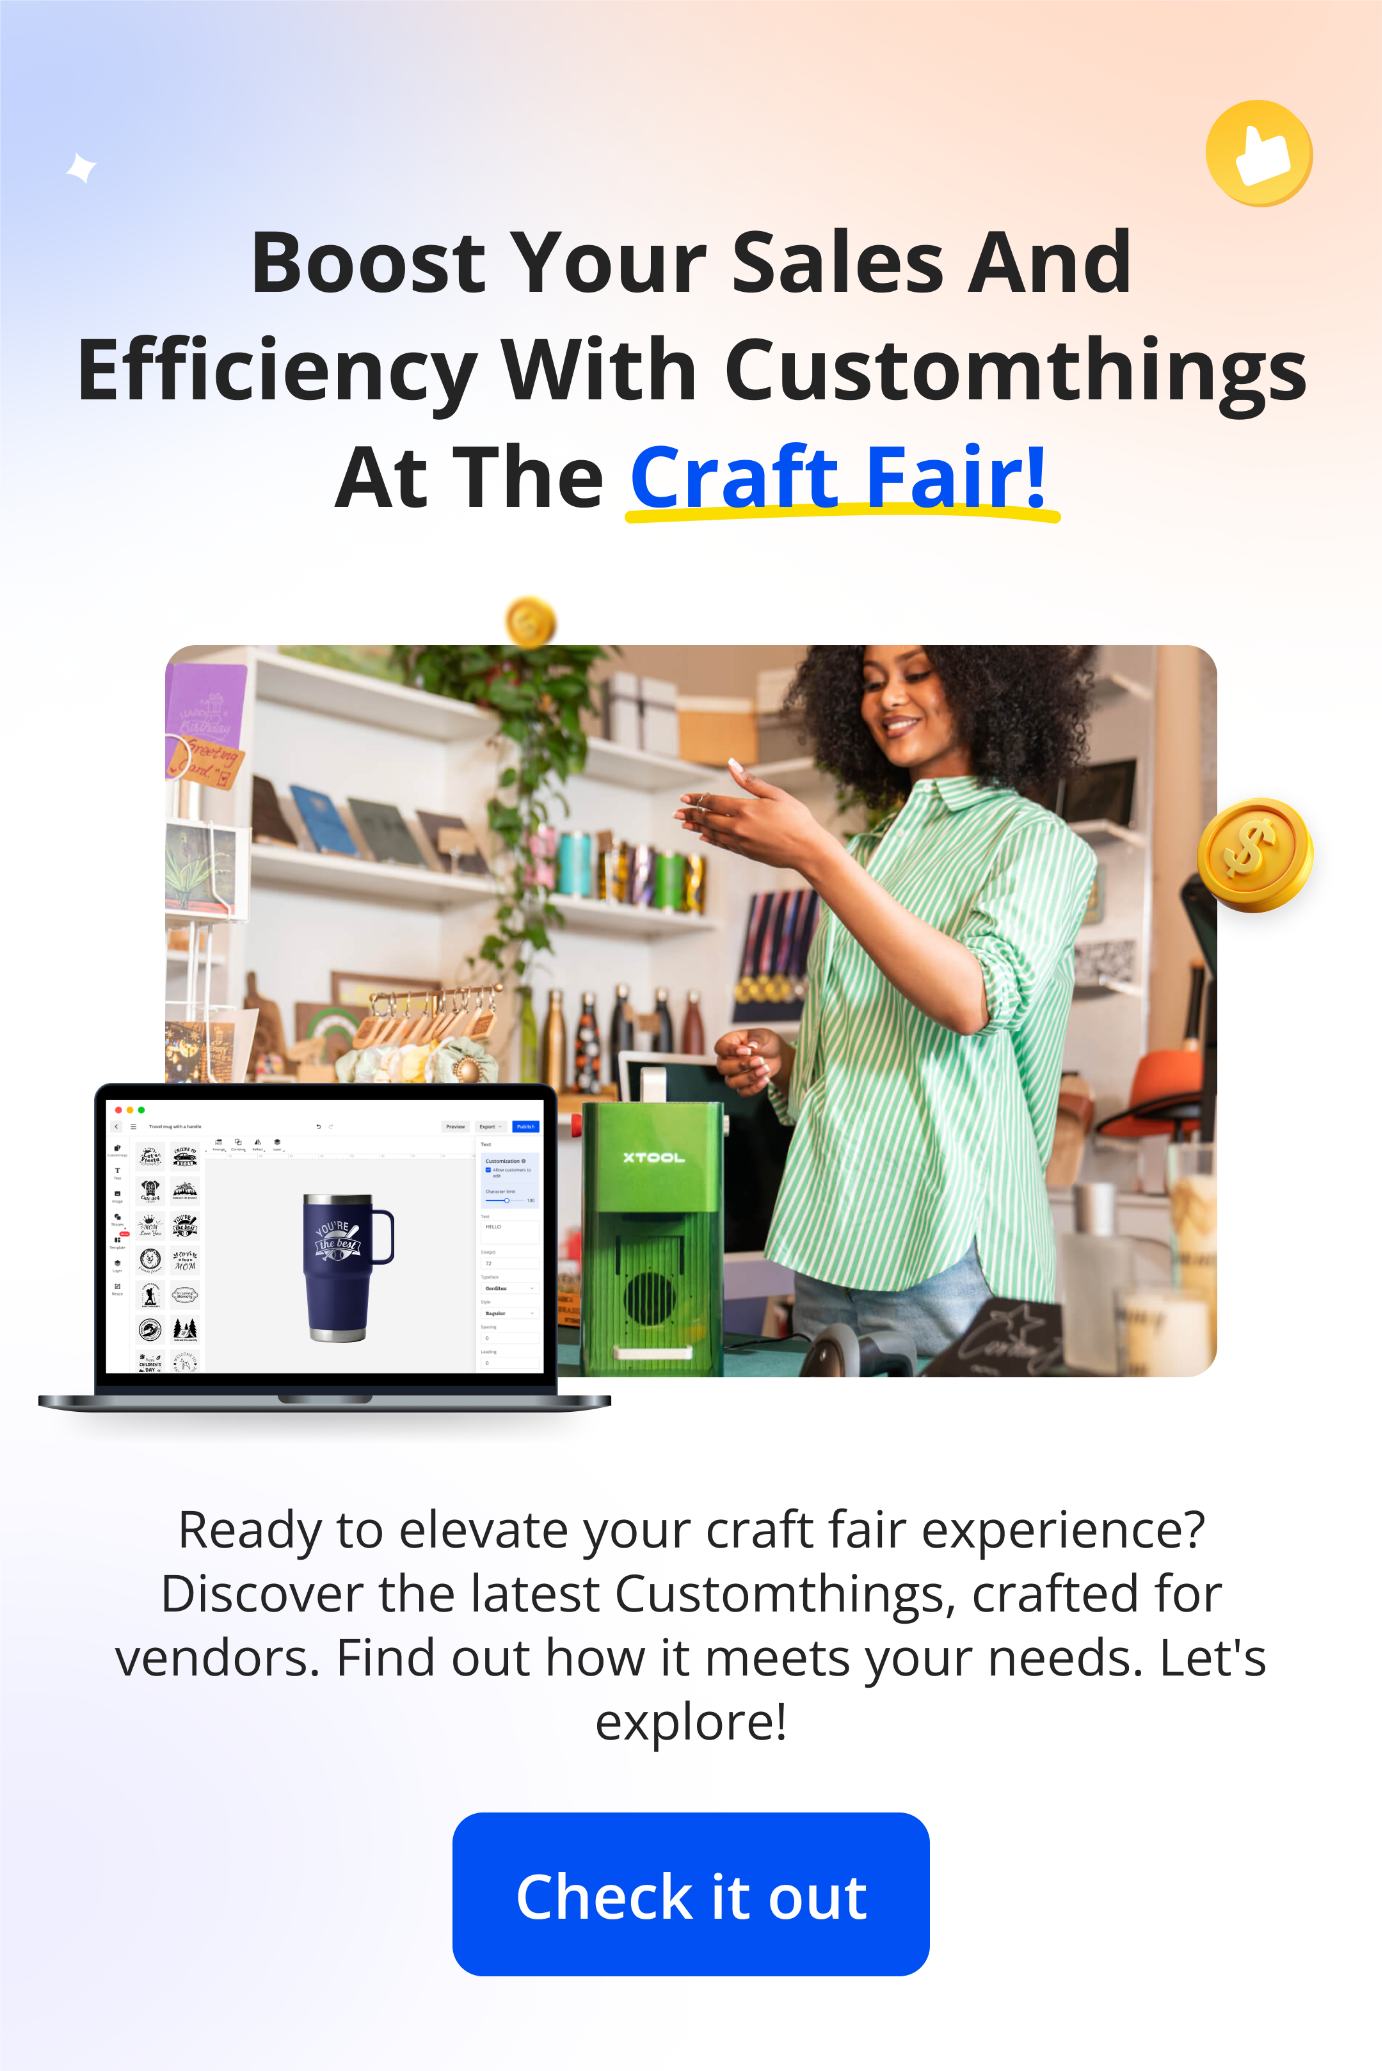 Customthings for Your Craft Fair Success